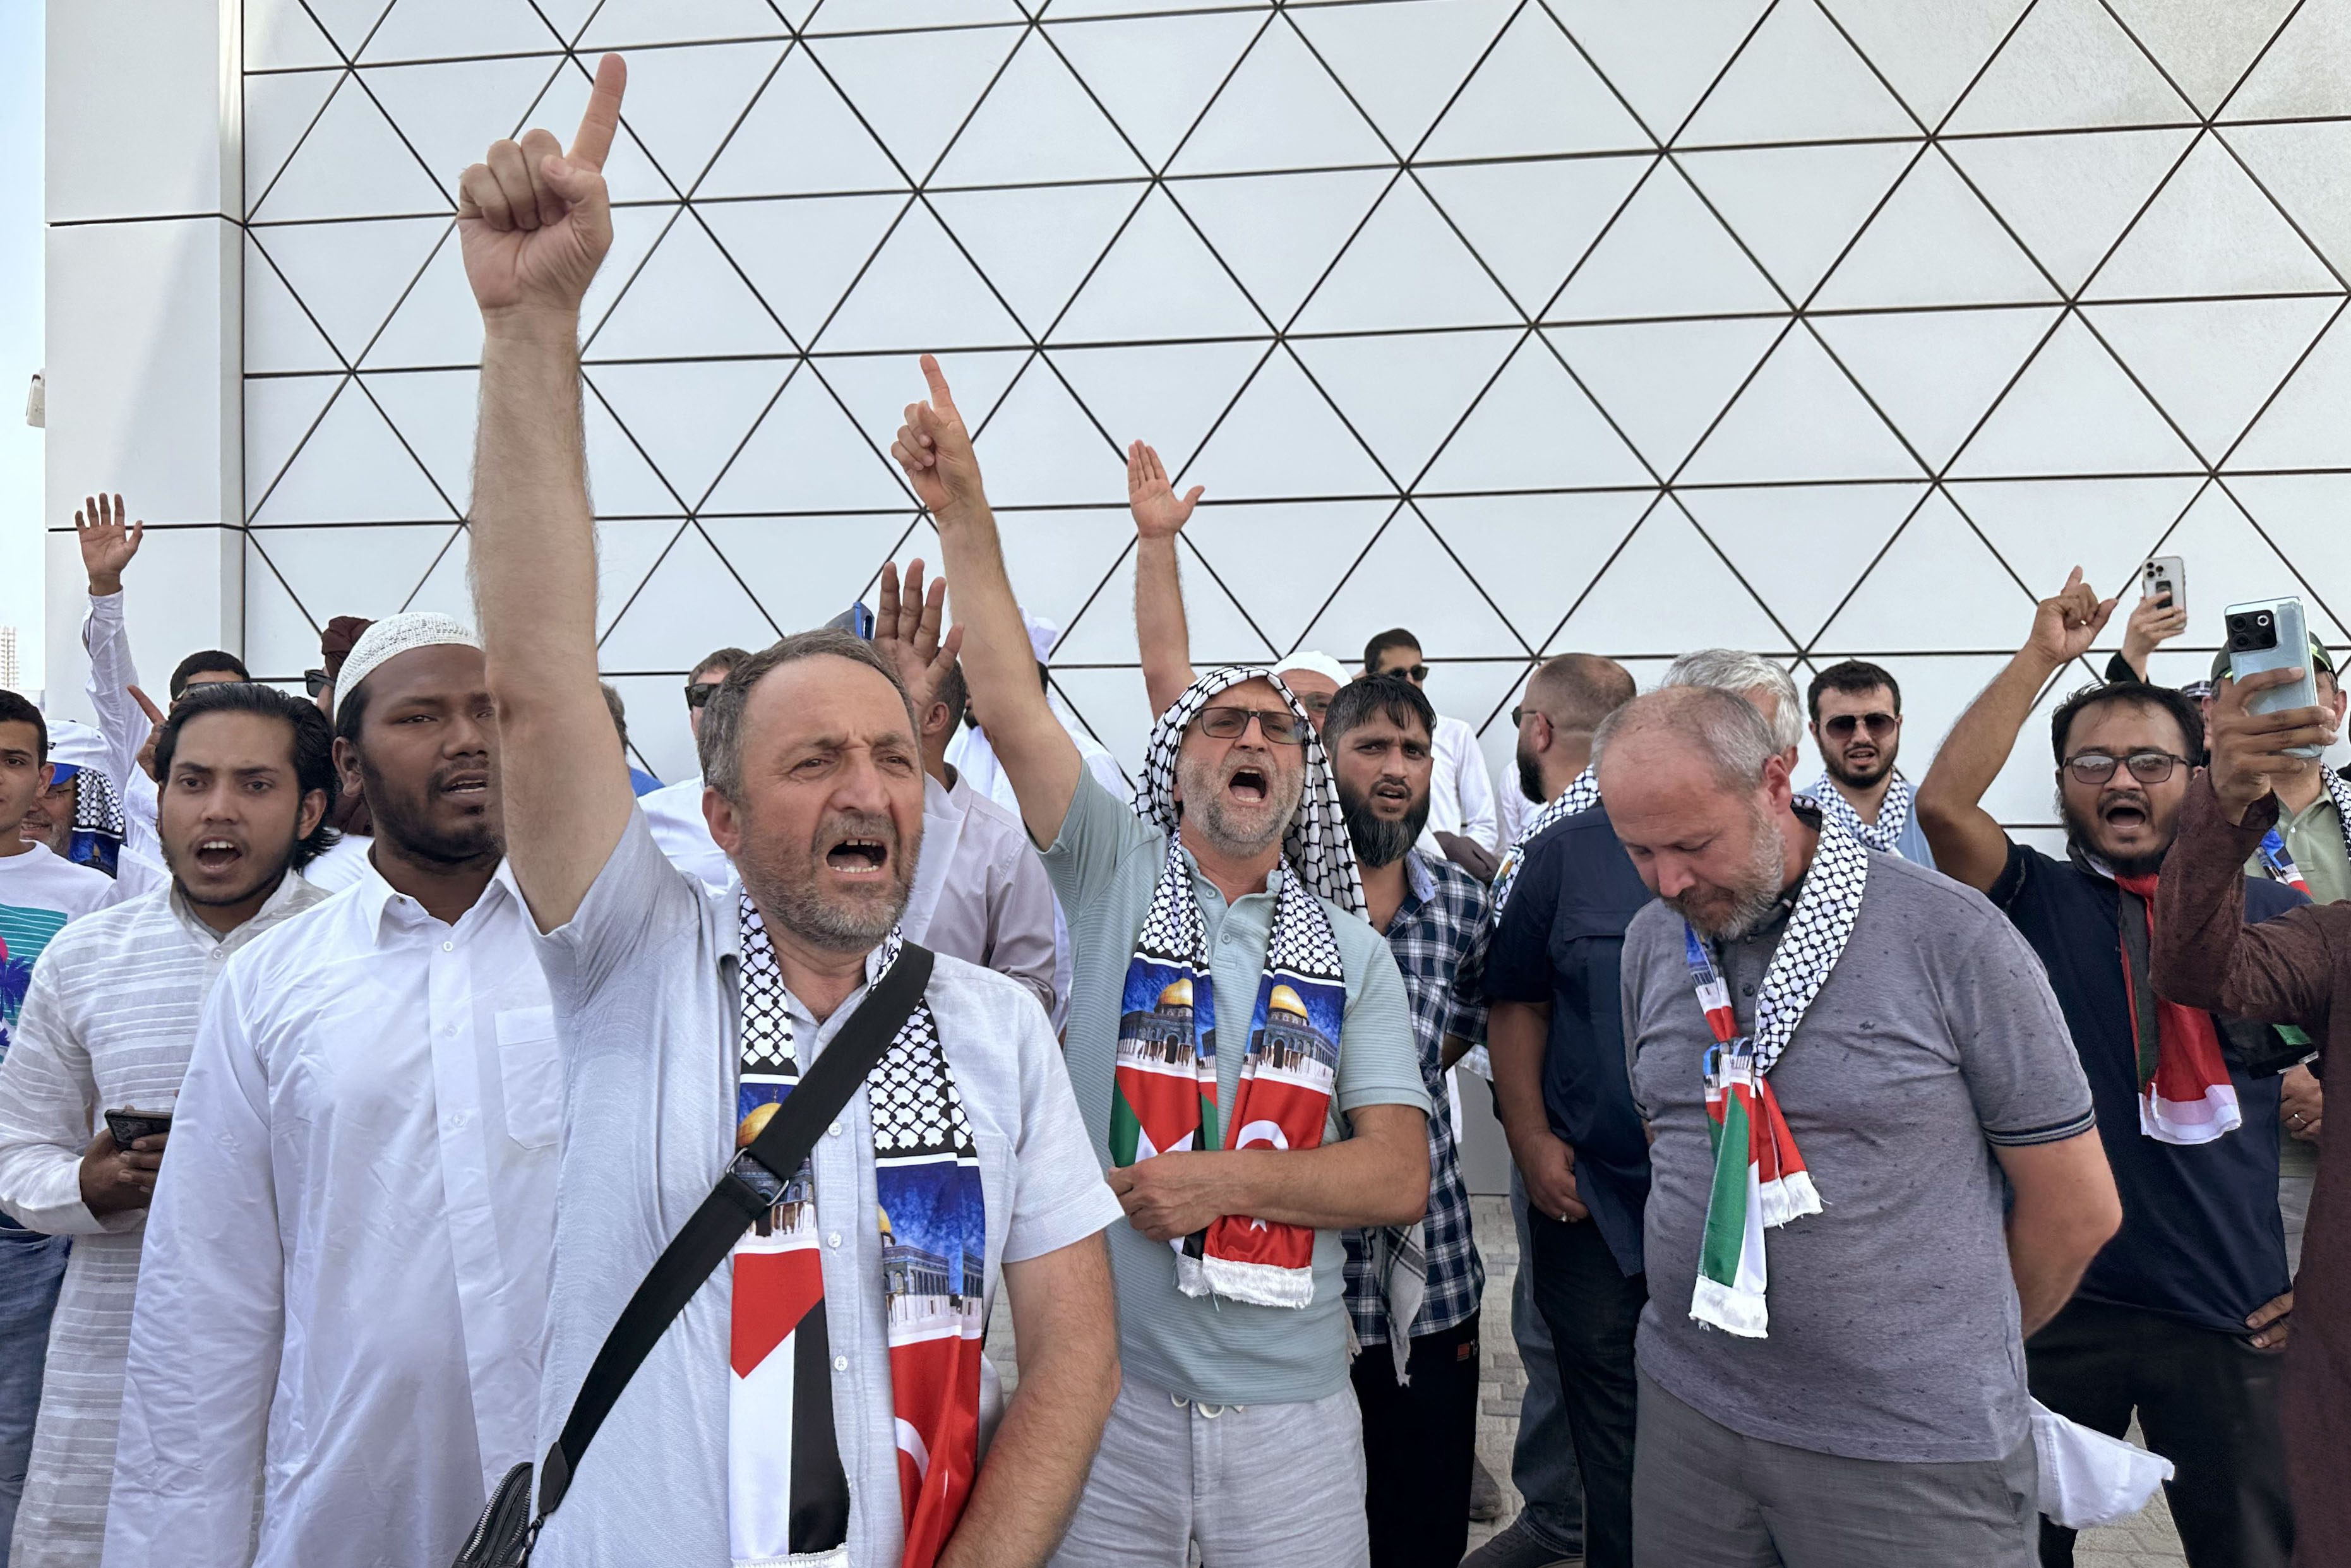 Mourners shout slogans in the grounds close to the Imam Muhammad bin Abdul Wahhab mosque during the final prayers for Ismail Haniyeh during his funeral in the Qatari capital Doha. Photo: AFP